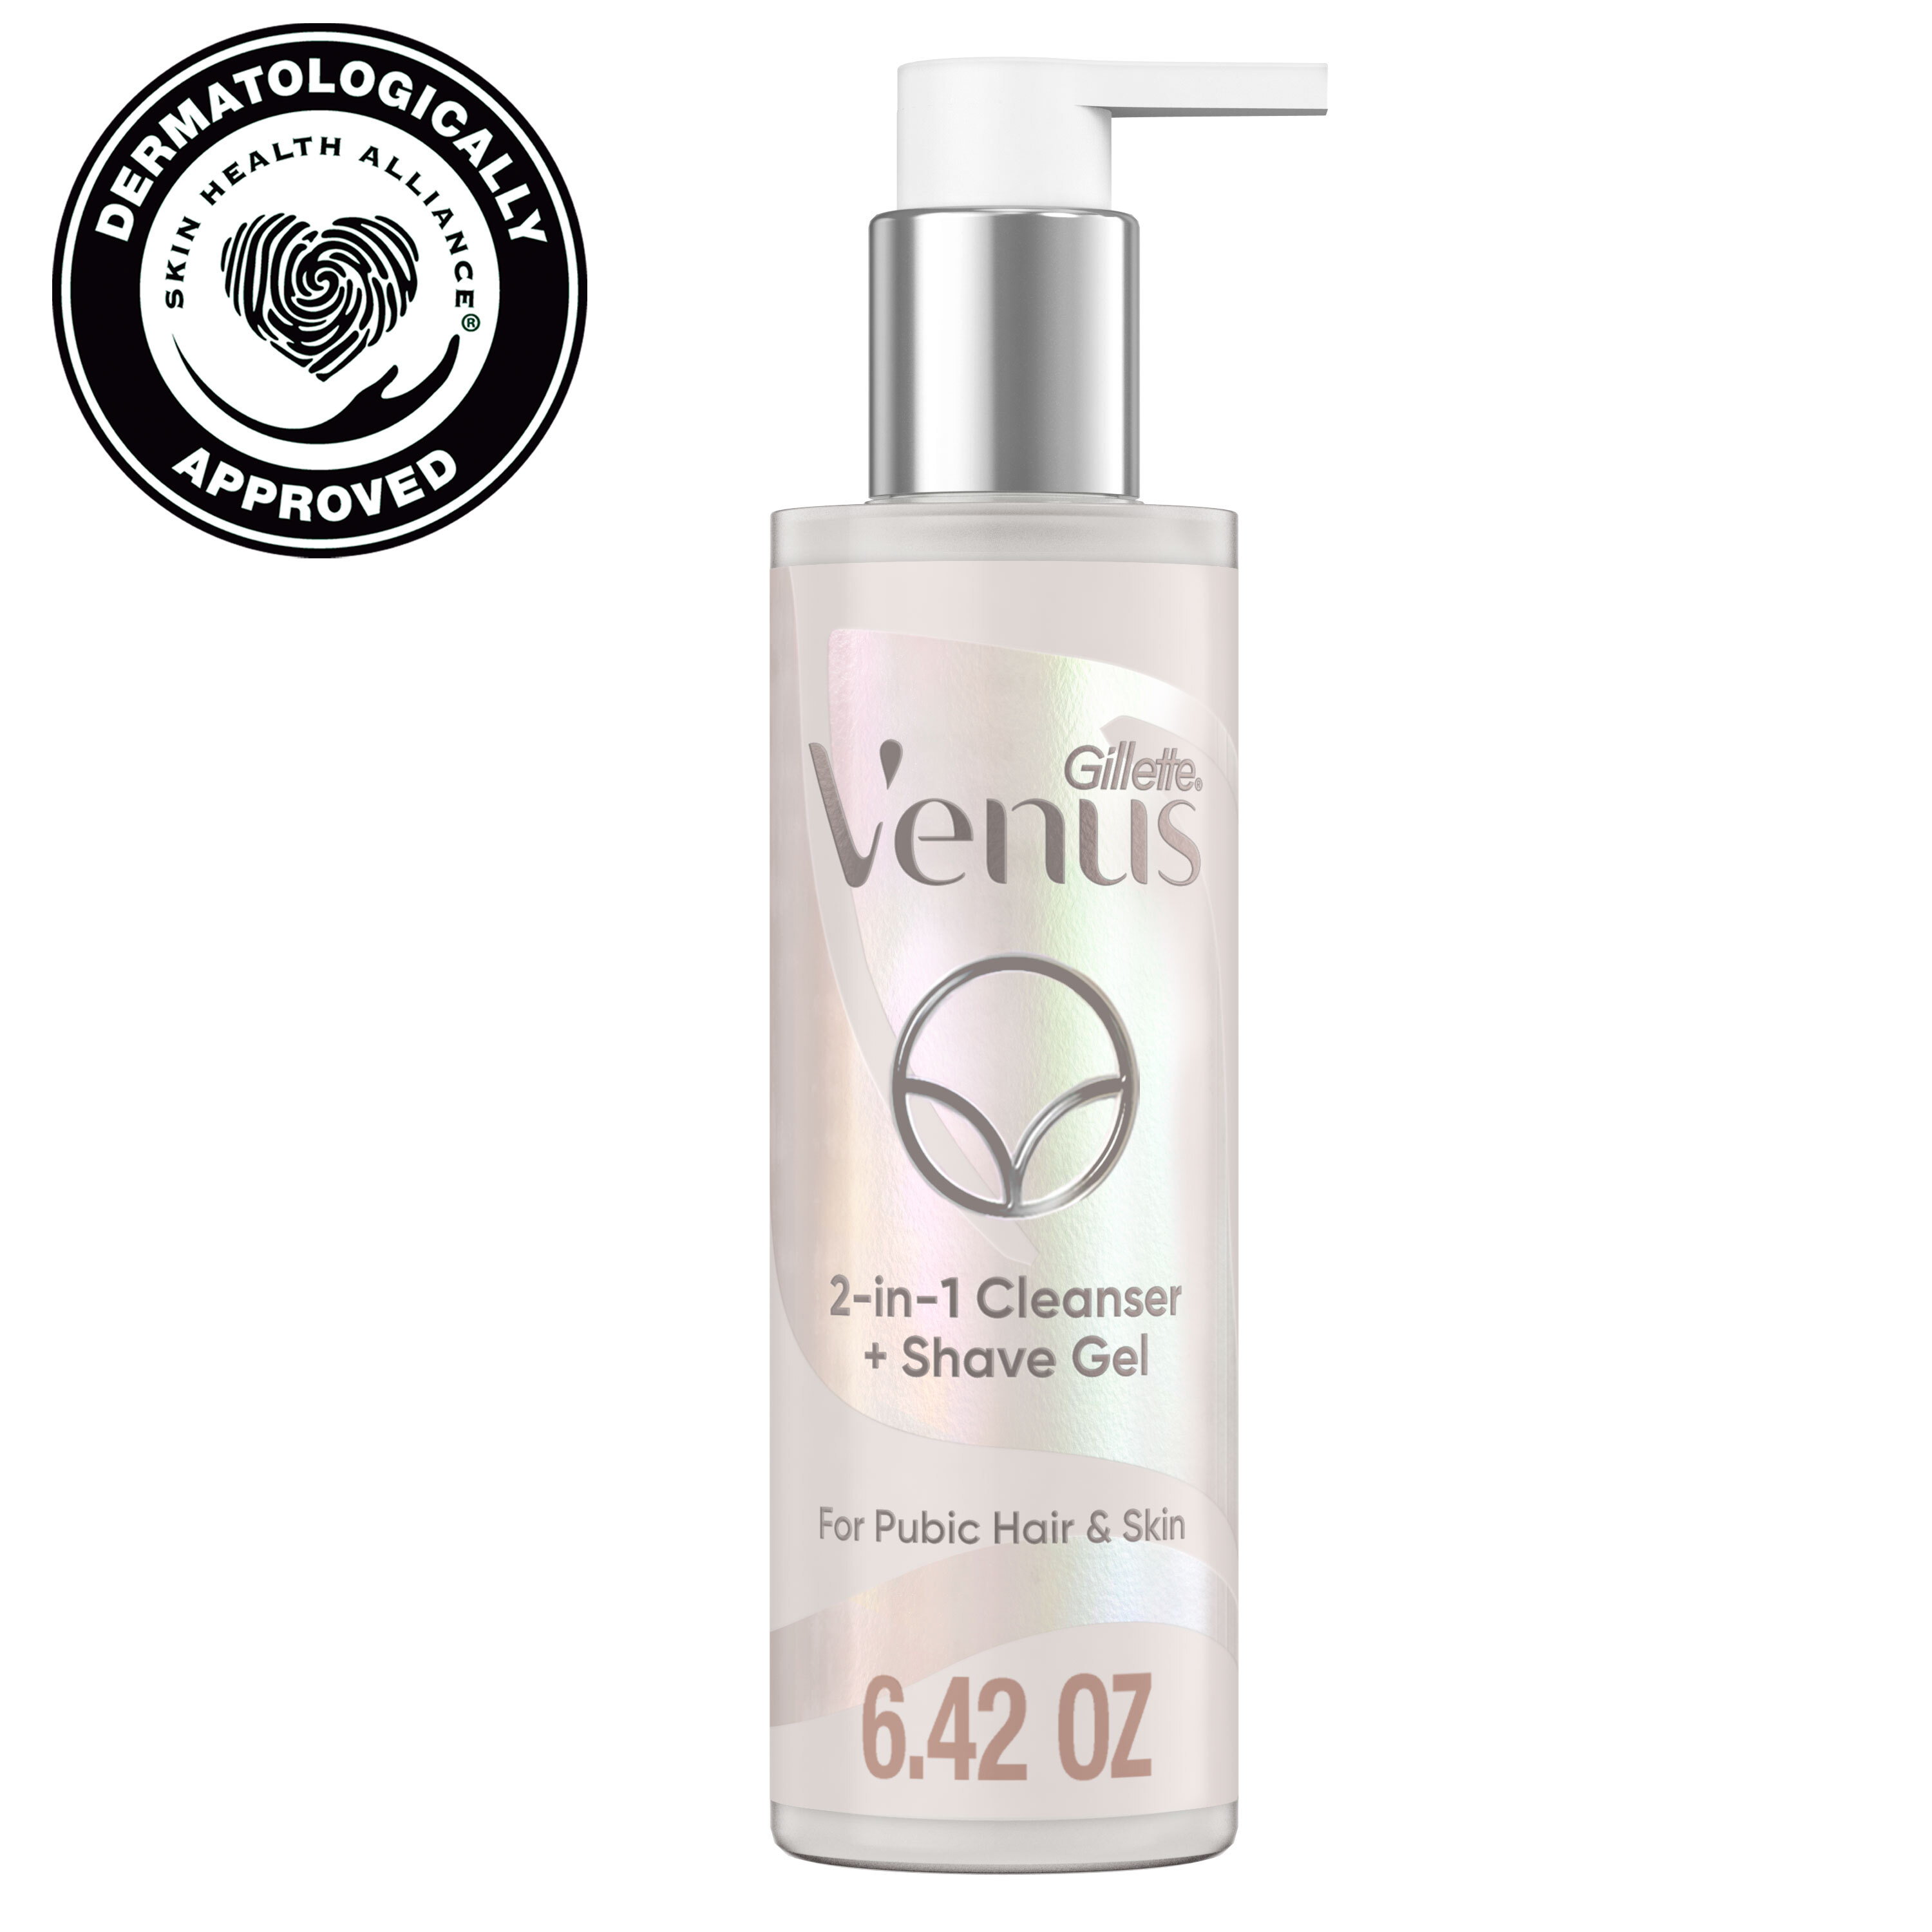 Gillette Venus for Female Pubic Hair and Skin, 2-in-1 Cleanser + Shave Gel, 6.4 oz, White - image 1 of 10